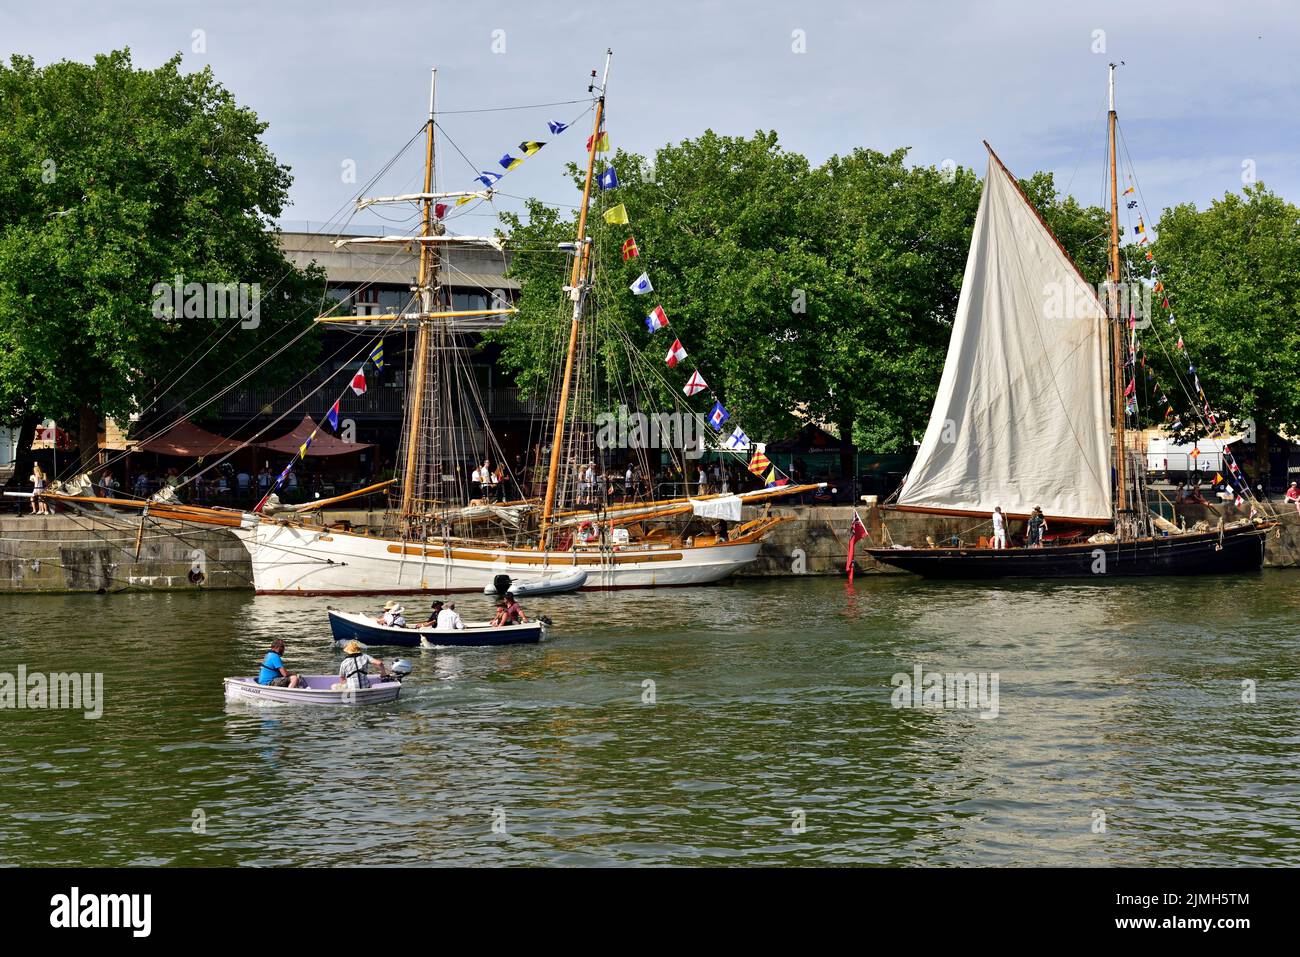 Bristol floating harbour on hot sunny day with two small boats and two tall sailing ships by quayside during festival, UK Stock Photo